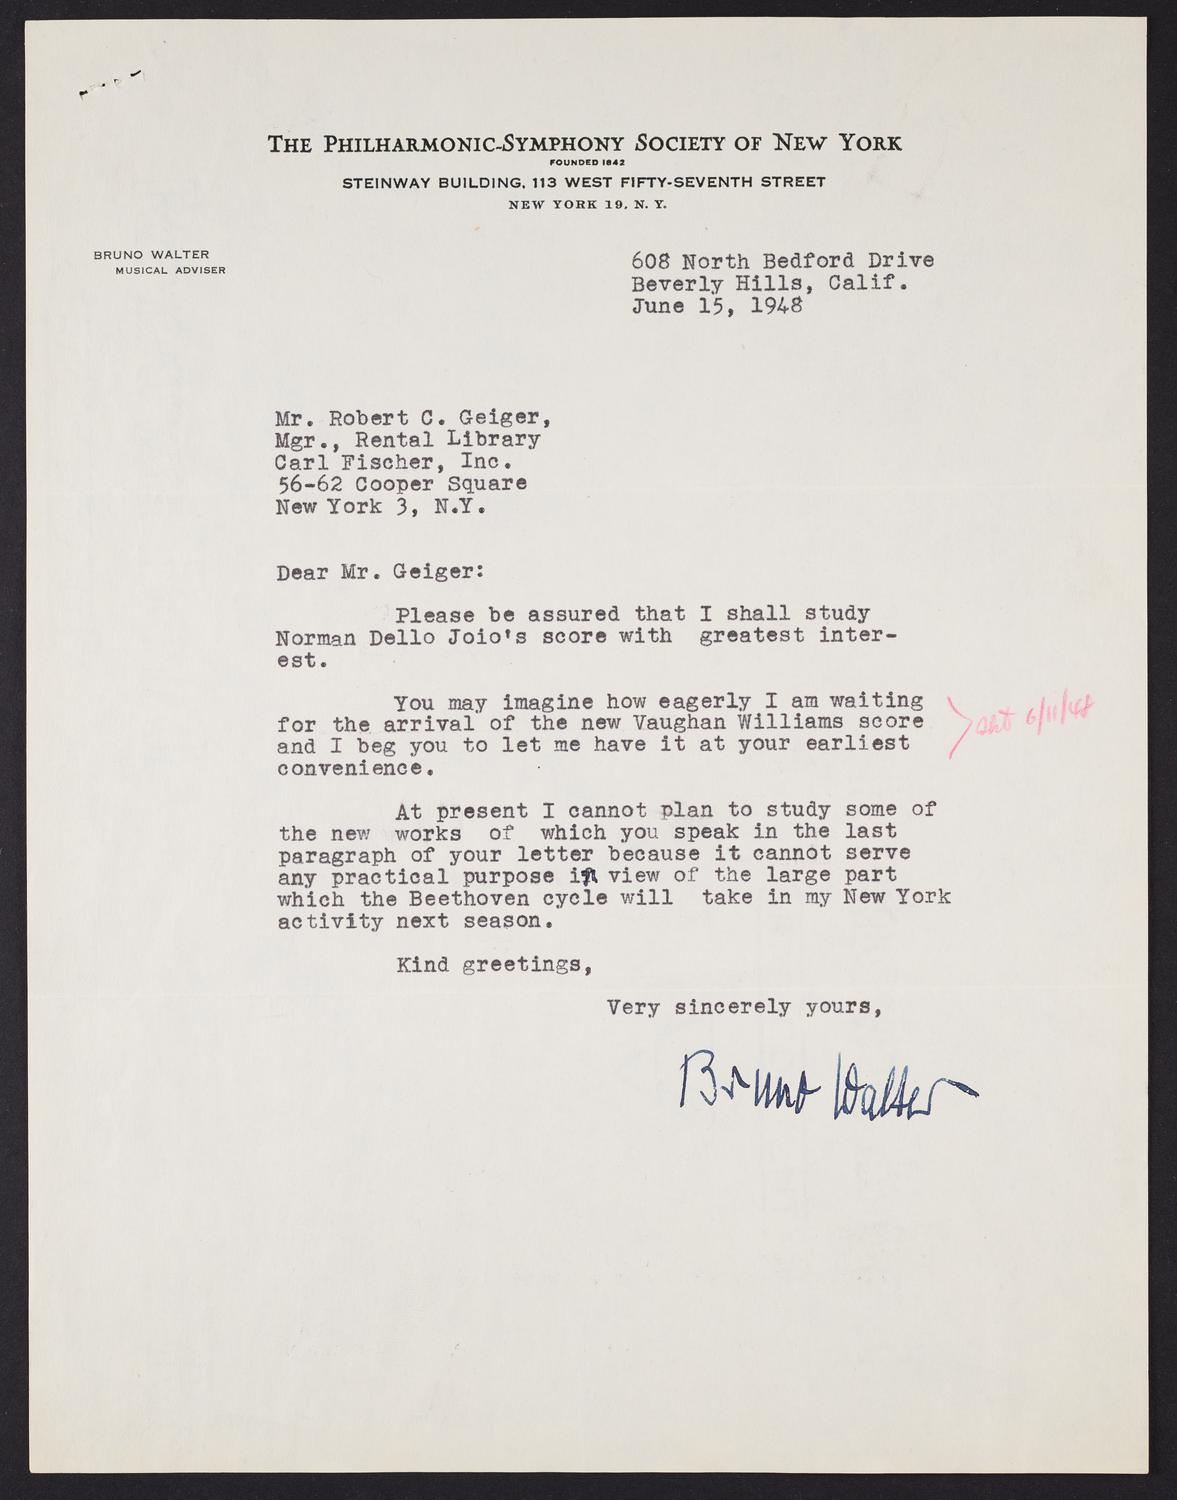 Correspondence from Bruno Walter to Robert Geiger, page 1 of 3